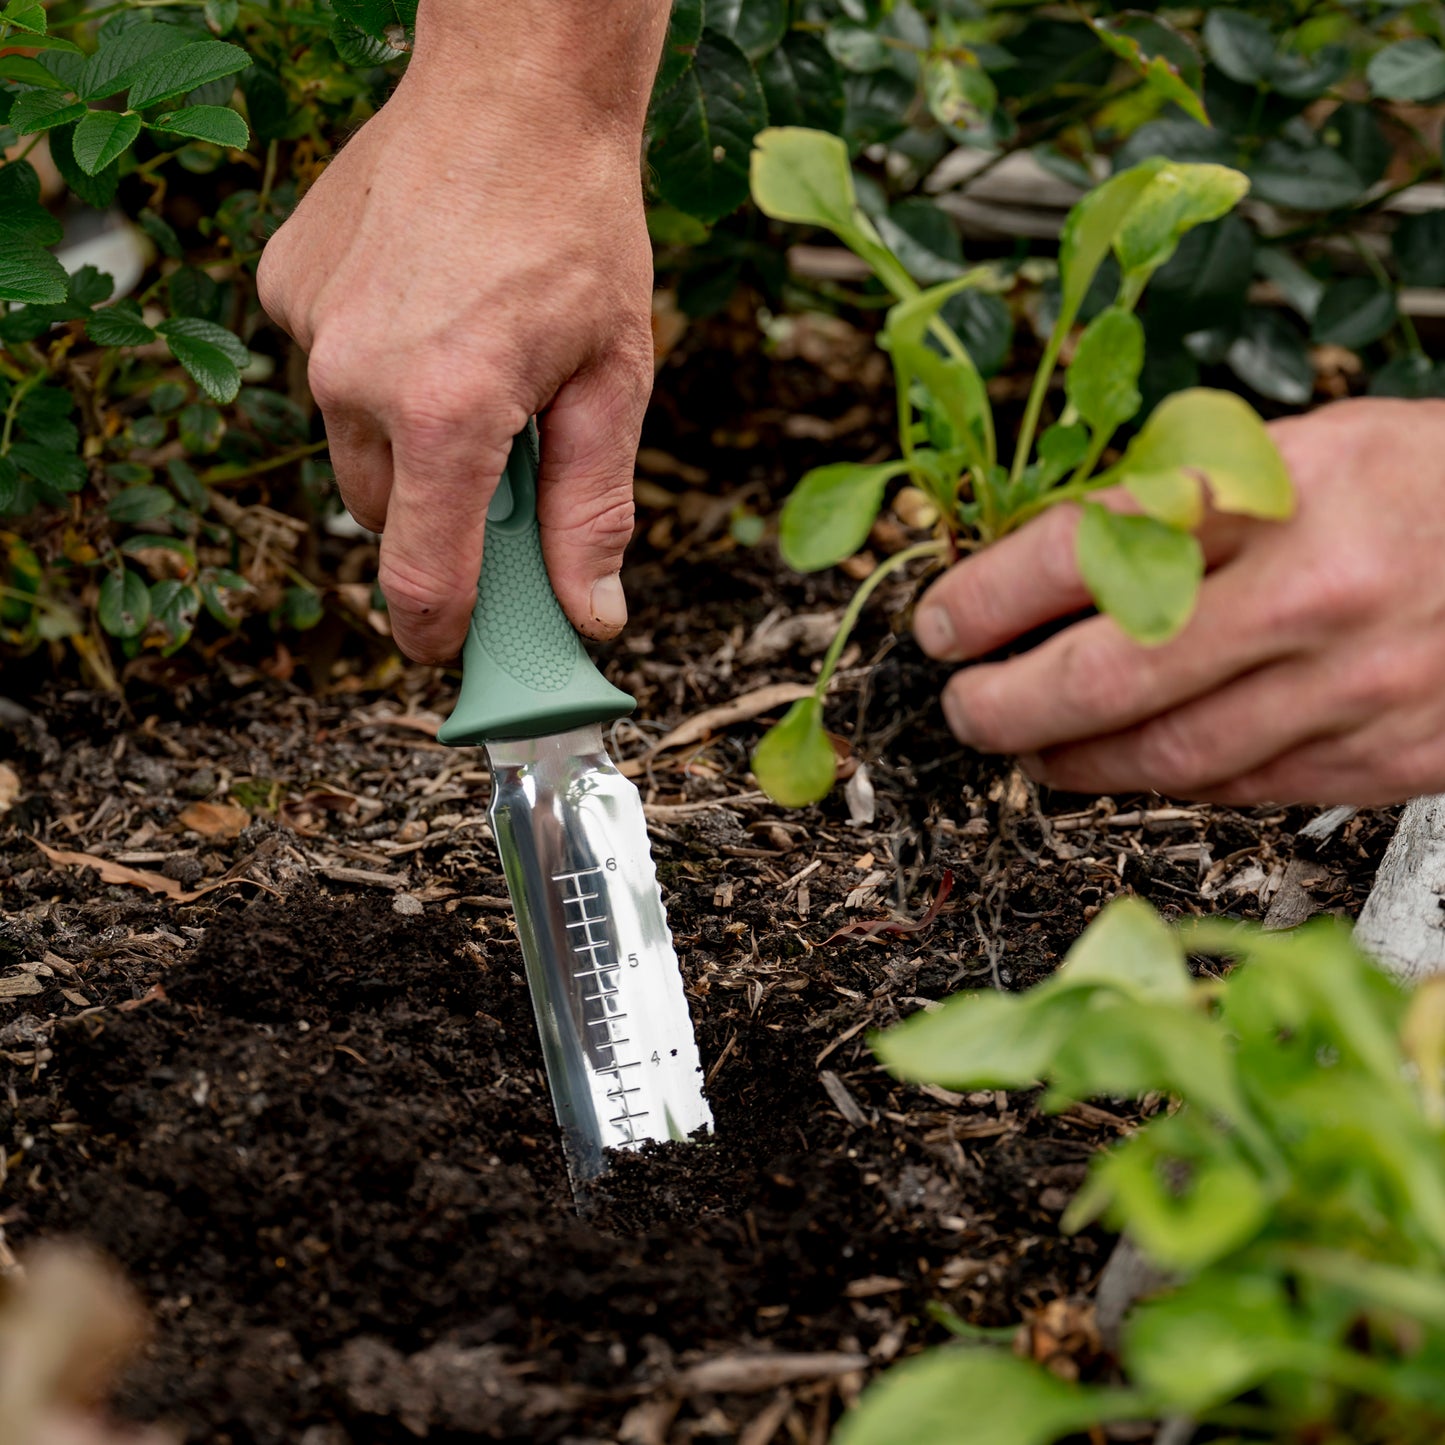 Man using the Hori Hori Garden Knife to dig out weeds in garden